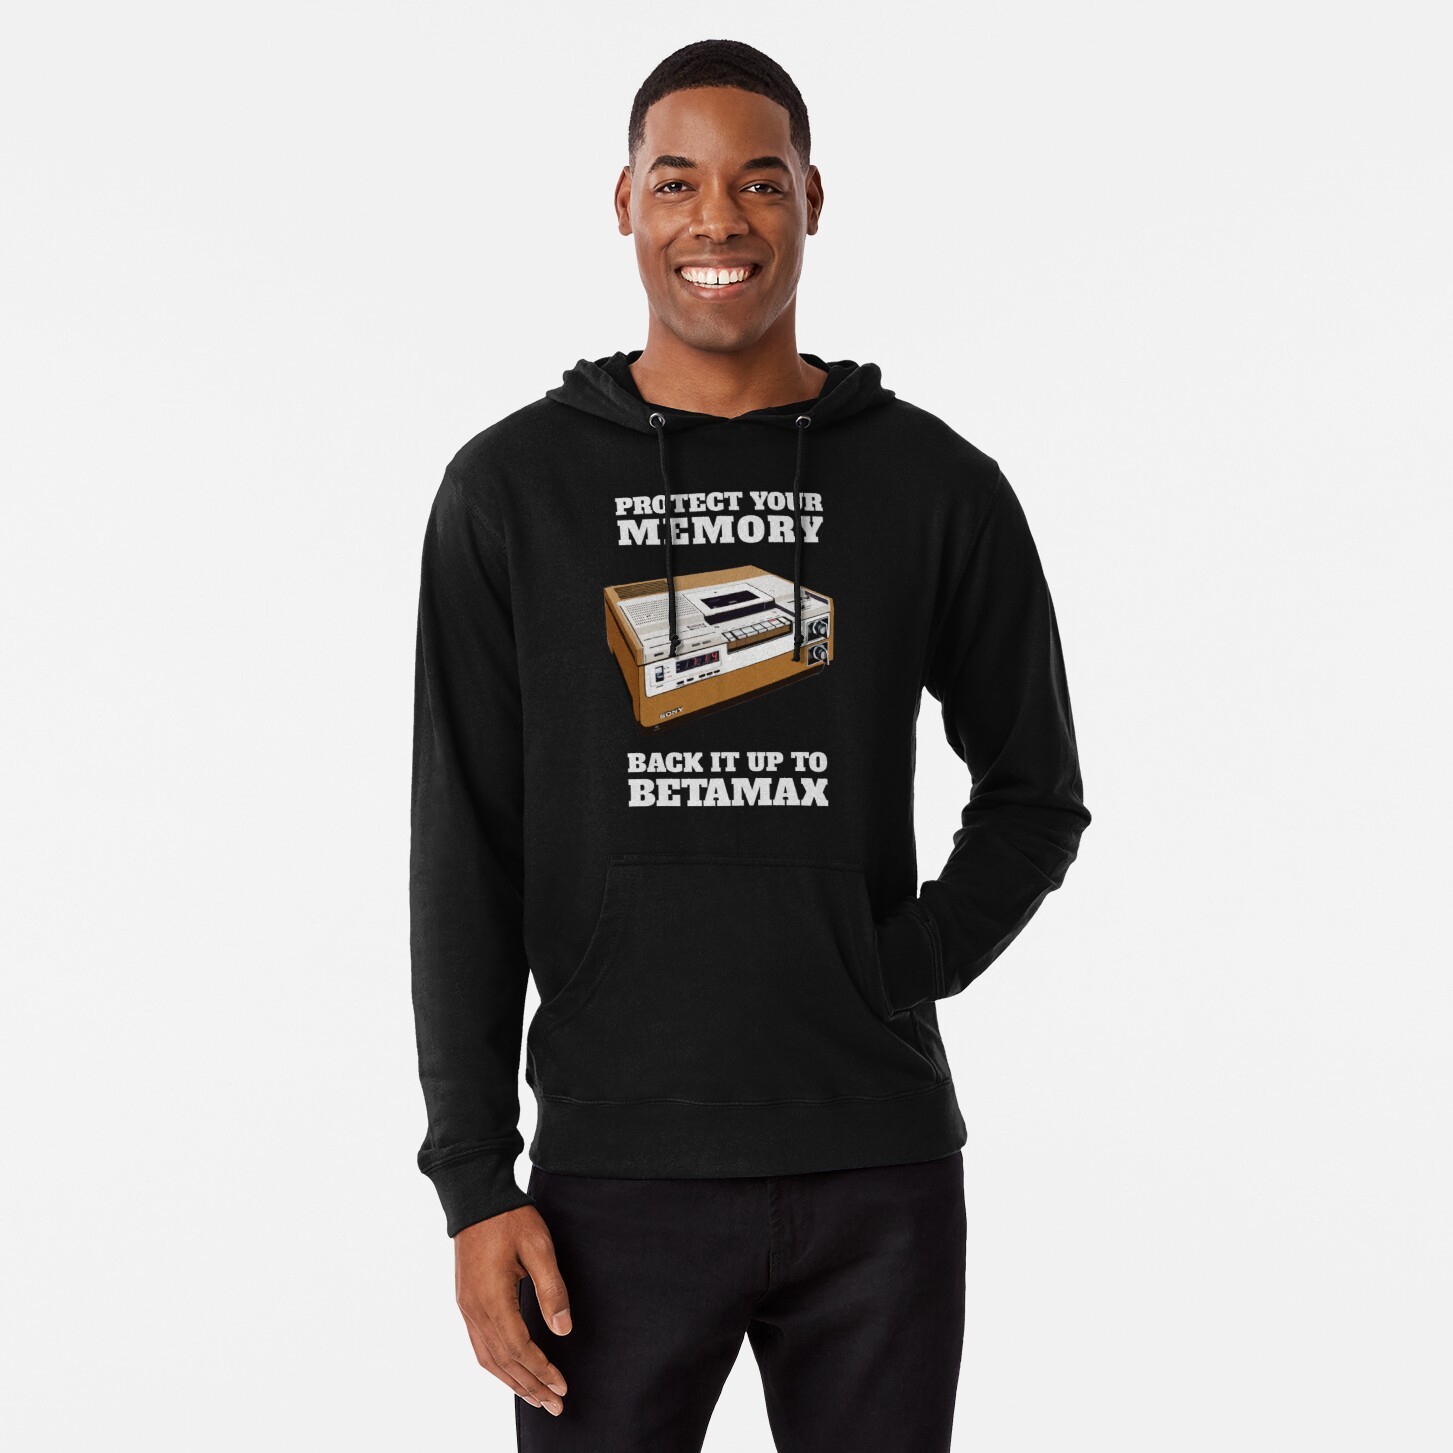 Protect Your Memory - Back it up to Betamax! Lightweight Hoodie by NTK Apparel